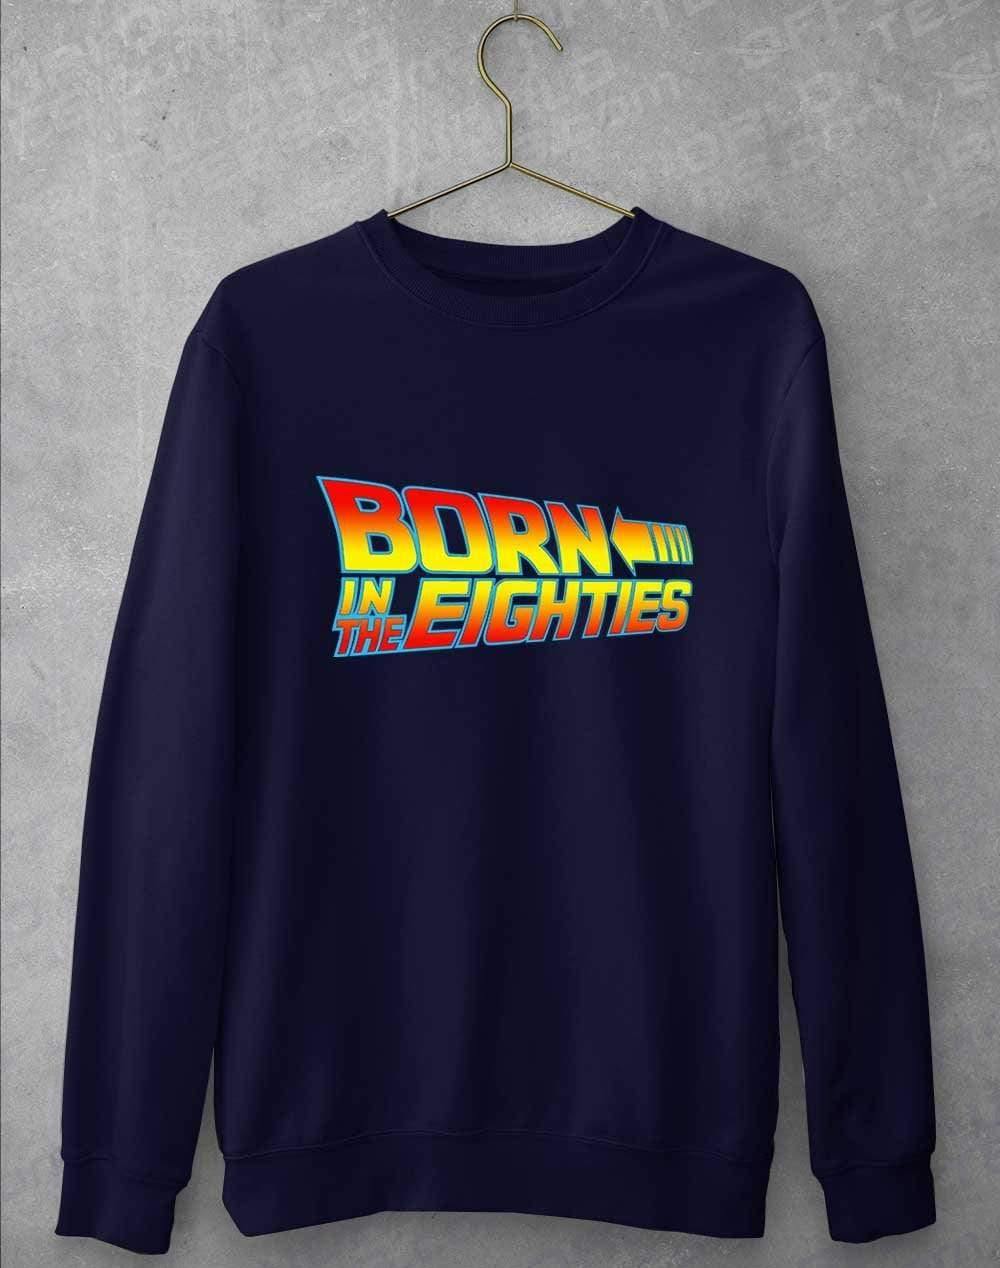 Born in the... (CHOOSE YOUR DECADE!) Sweatshirt 1980s - Navy / S  - Off World Tees